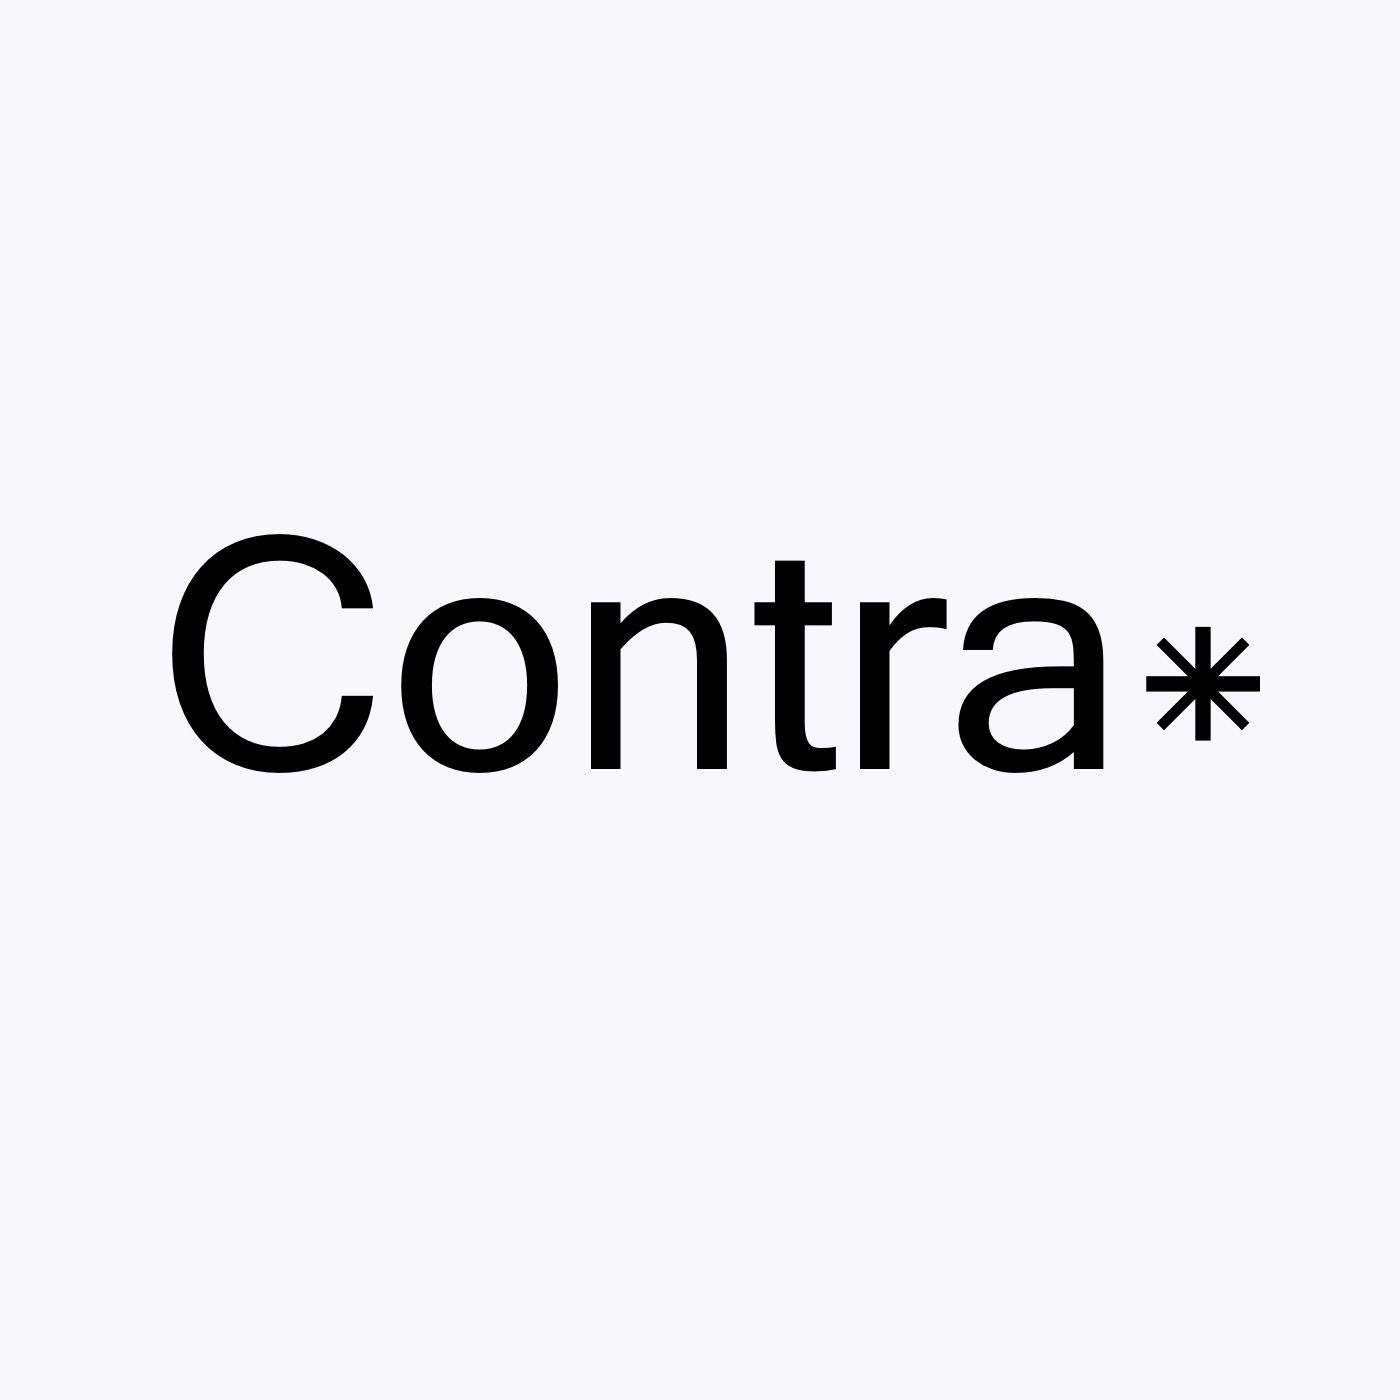 Contra Logo - Contra* podcast — Mapping Access